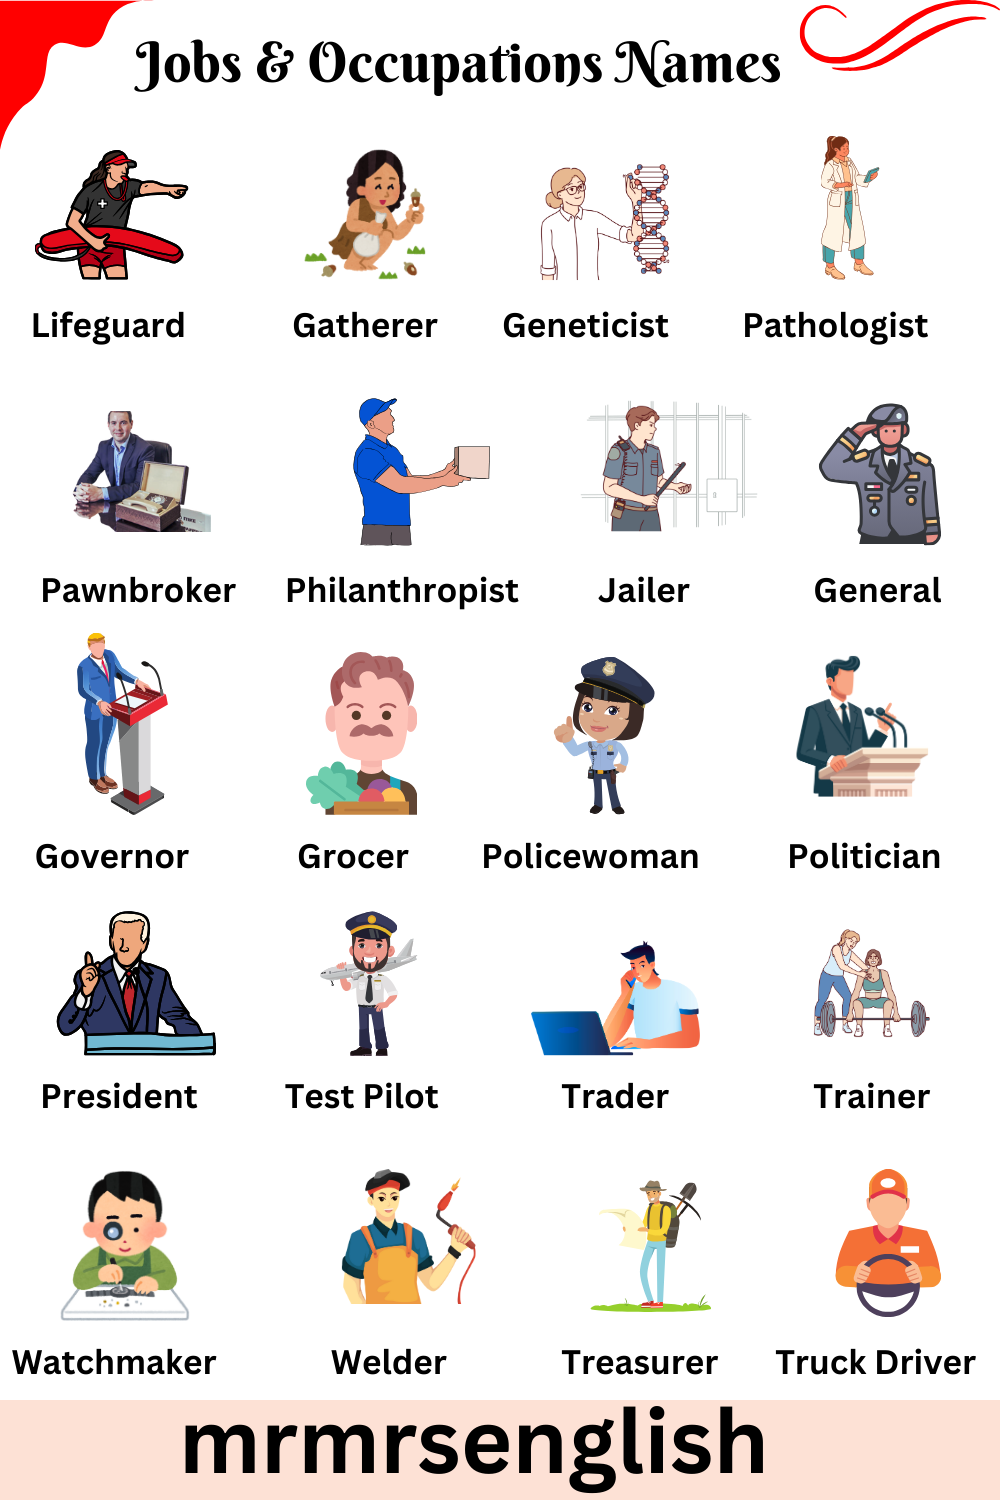 Jobs and Occupations Names in English